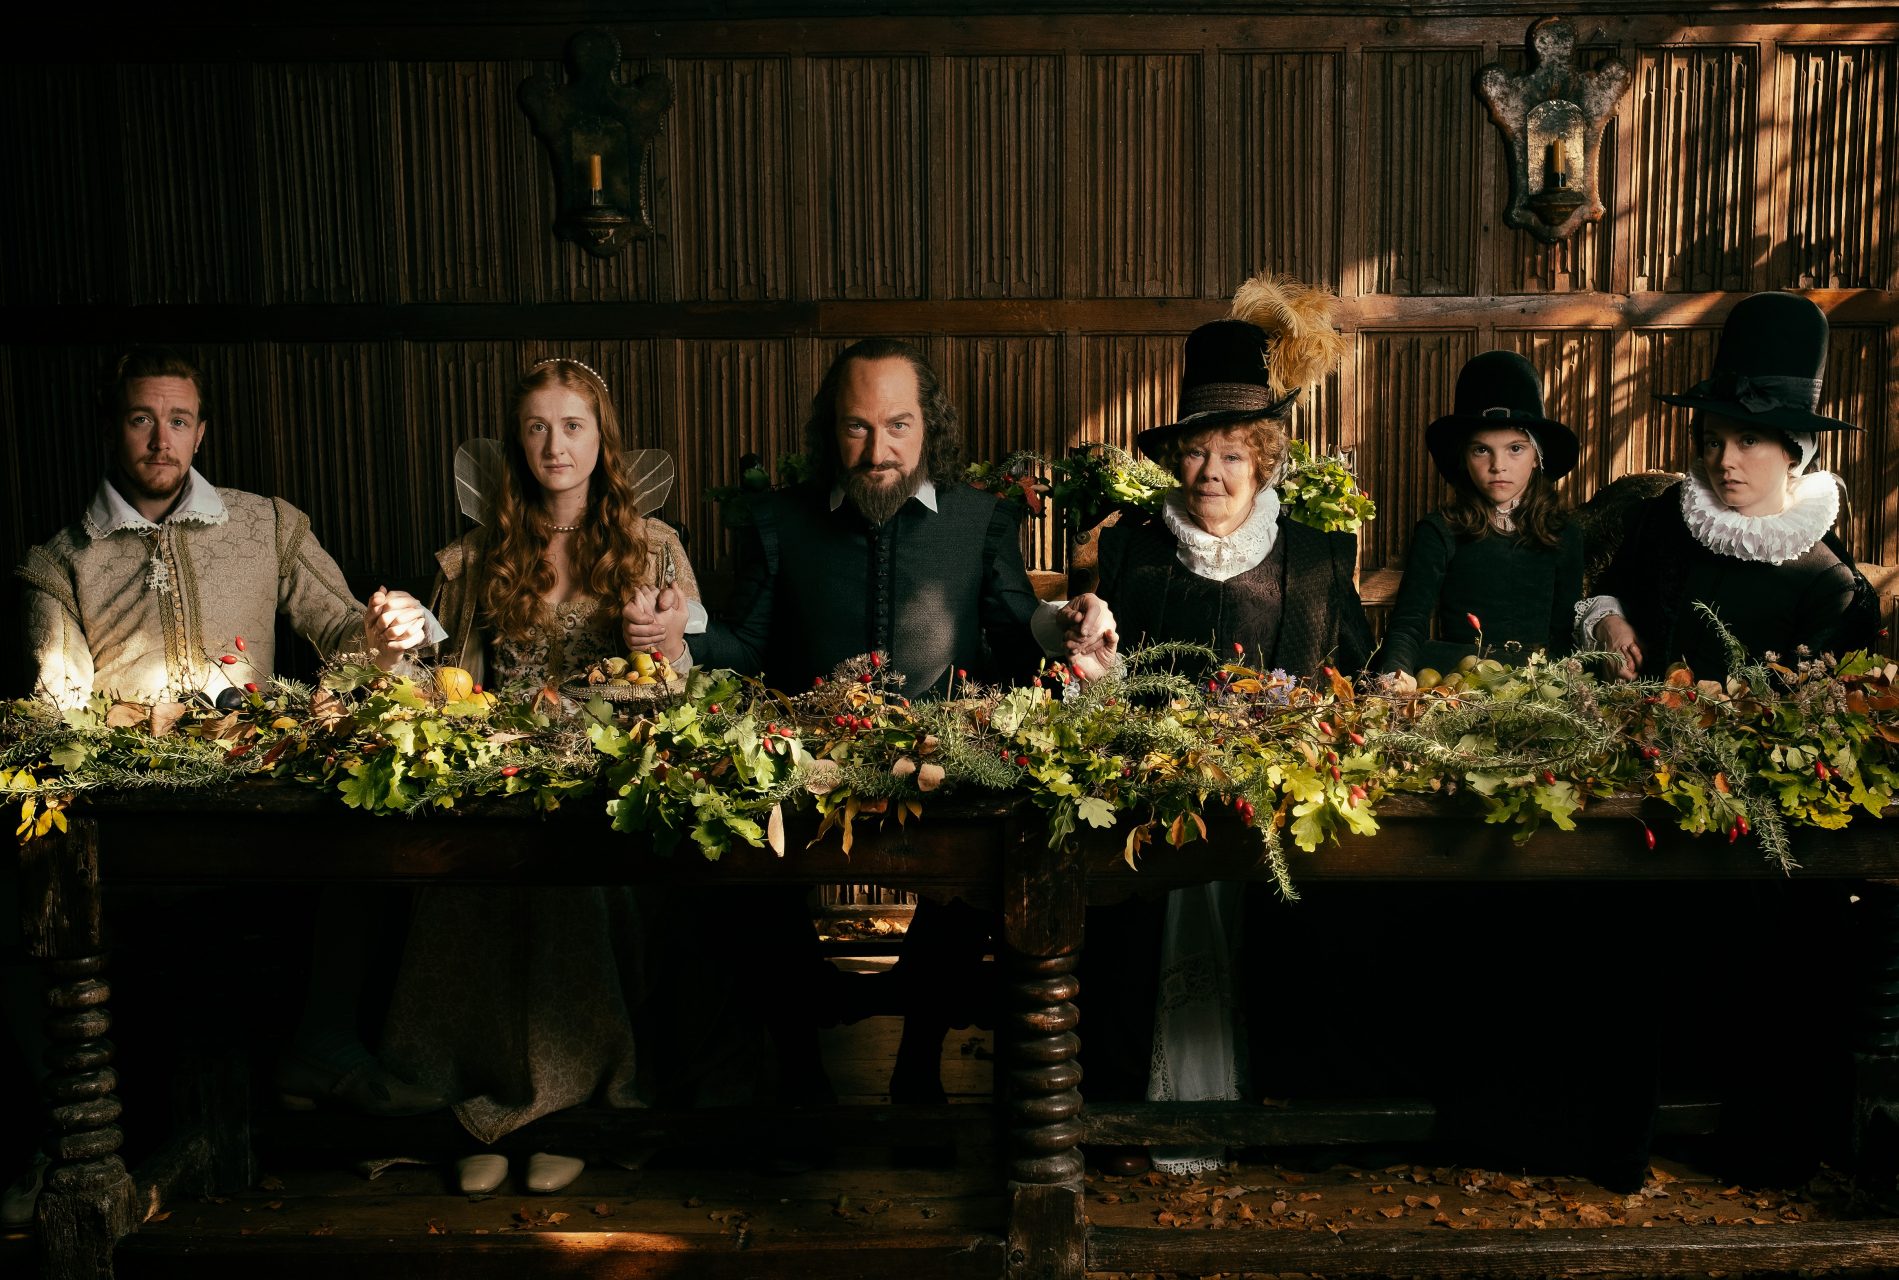 Left to right: Jack Colgrave Hirst as Tom Quiney, Kathryn Wilder as Judith Shakespeare, Kenneth Branagh as William Shakespeare, Judi Dench as Anne Hathaway, Clara Ducz-mal as Elizabeth Hall, Lydia Wilson as Susanna Hall Photo by Robert Youngson, Courtesy of Sony Pictures Classics